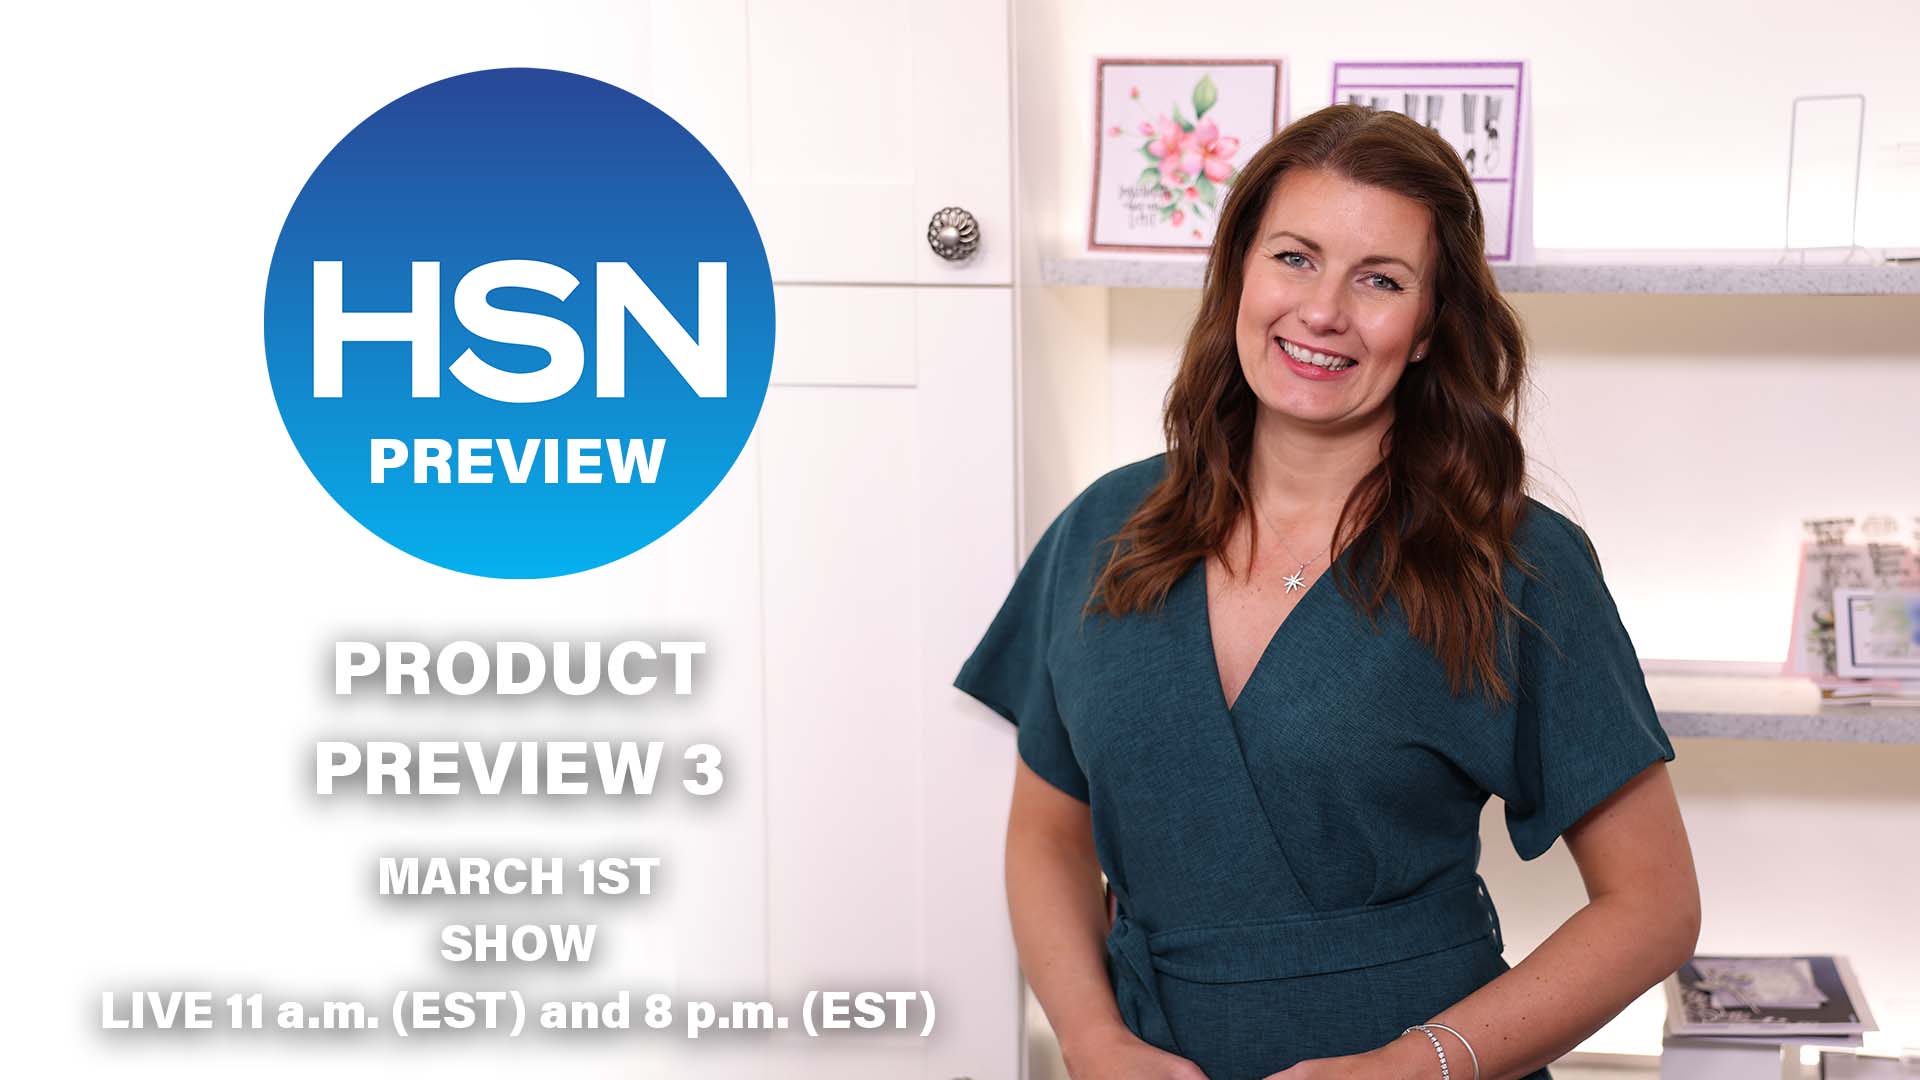 join-toni-for-her-product-preview-3---hsn-show-1st-march---broadcast-monday-24th-february-22